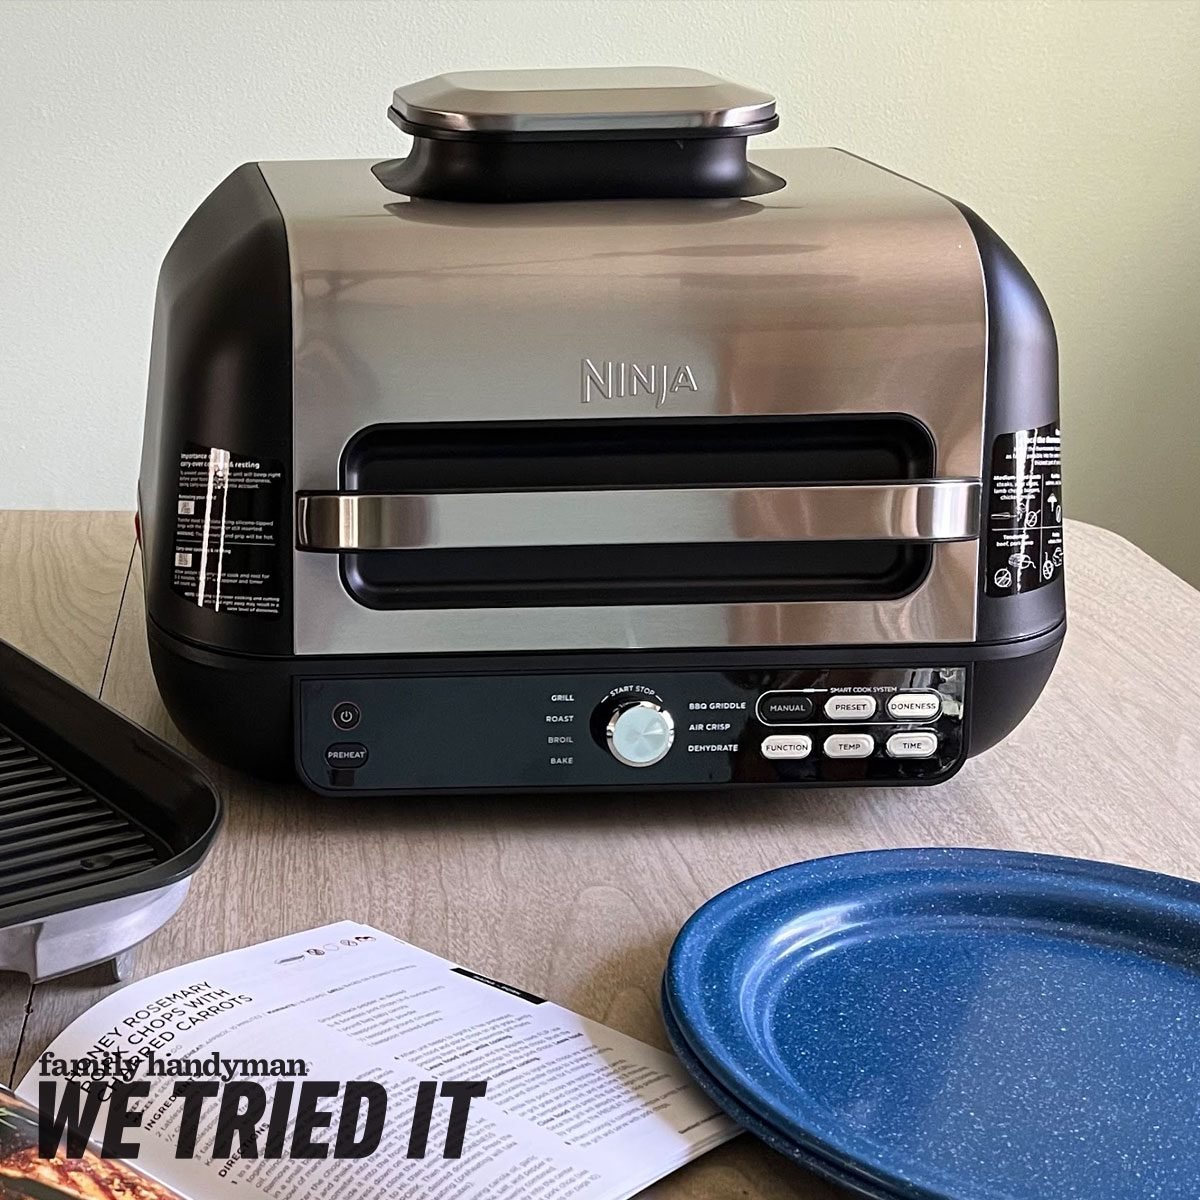 Ninja Foodi 7-in-1 Indoor Grill: A Quick Review of Features and Performance